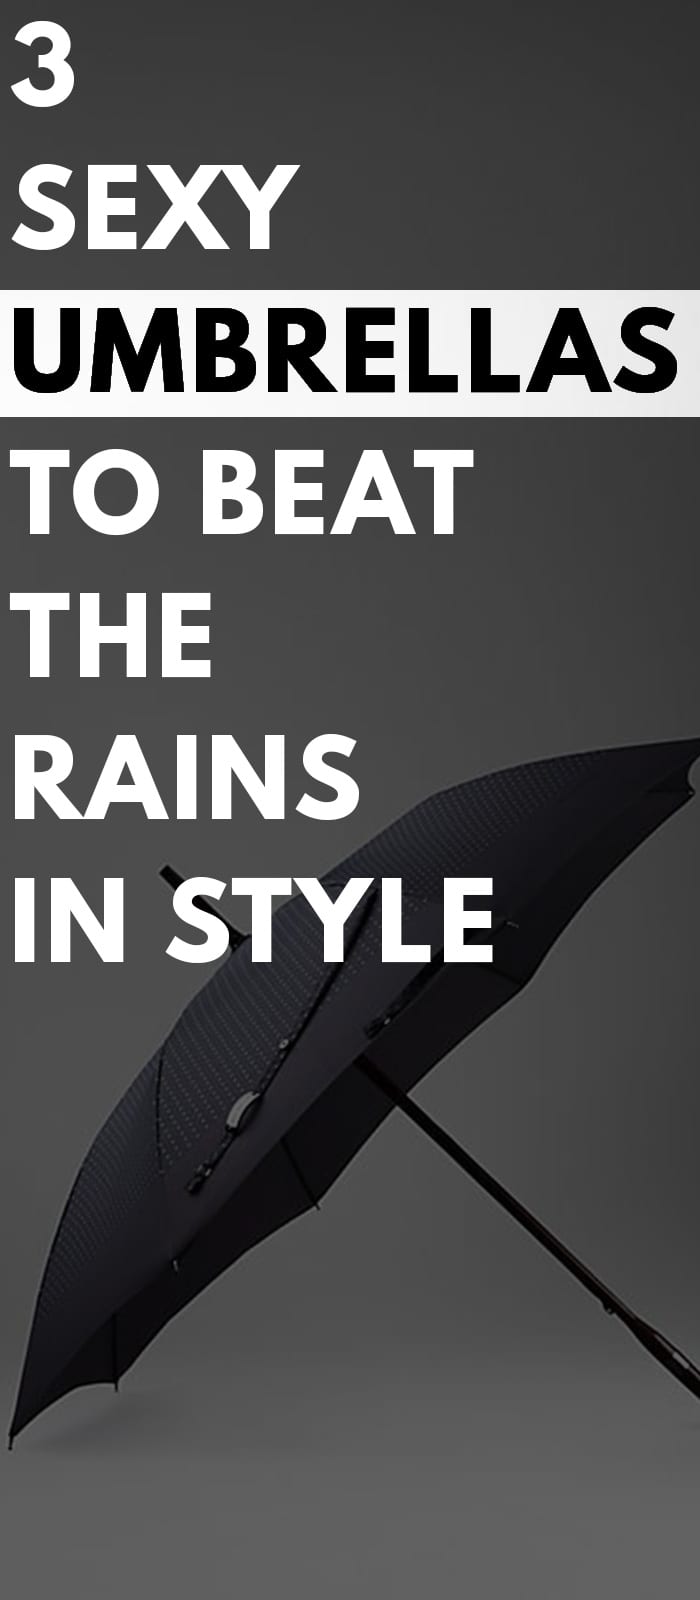 3-Sexy-Umbrellas-to-Beat-The-Rains-In-Style